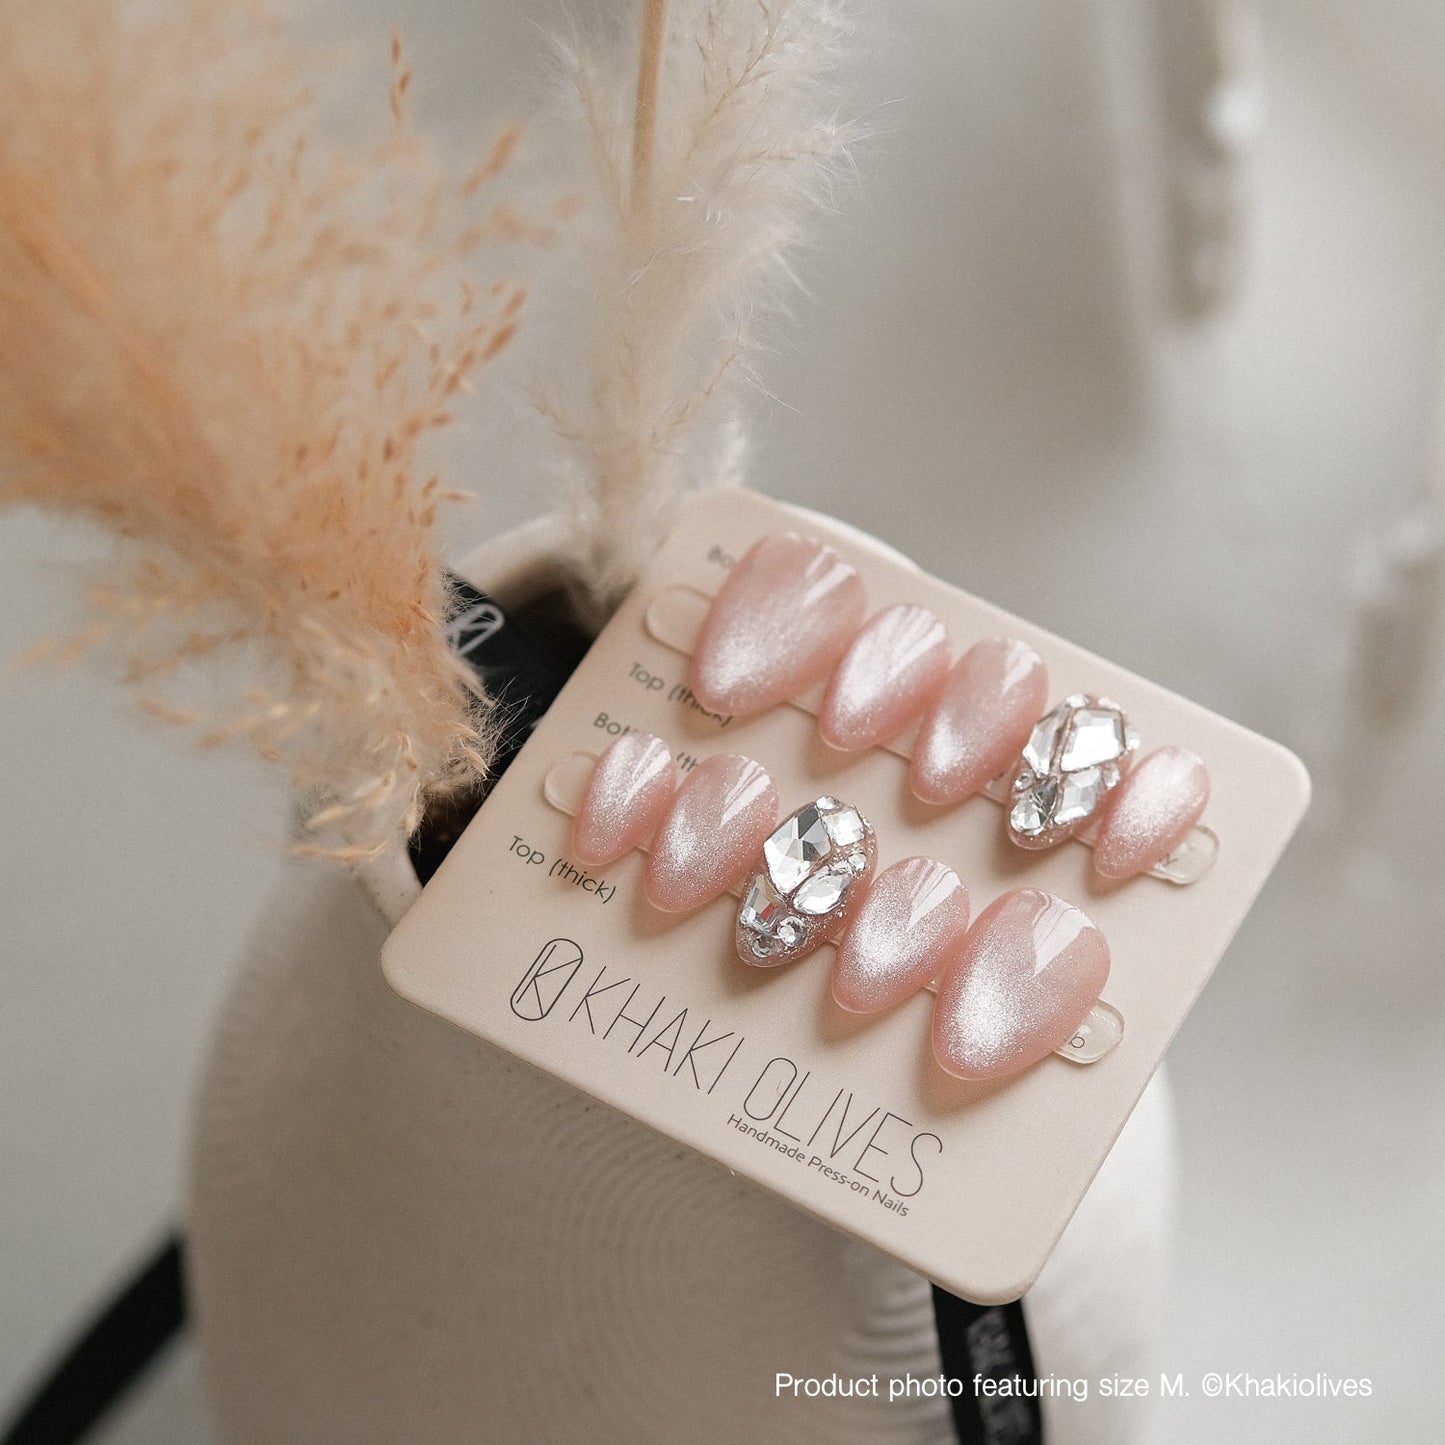 Backorder - Wish I could tell you - with Swarovski nail crystals (Est. Delivery 1-15th Jan)